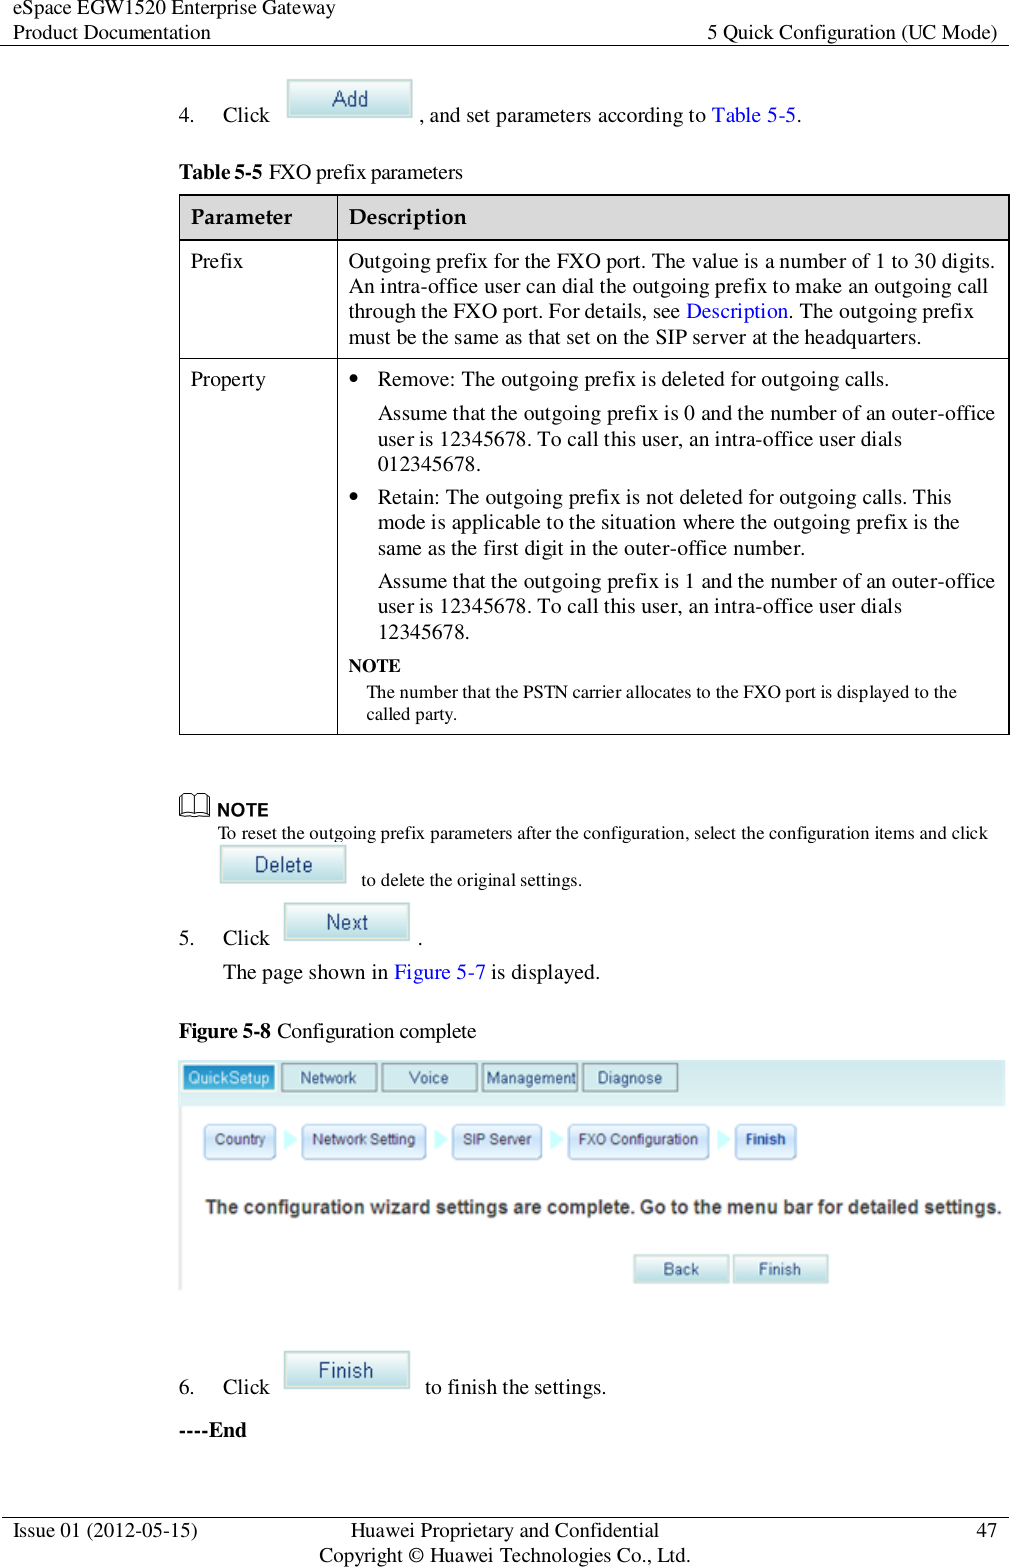 eSpace EGW1520 Enterprise Gateway Product Documentation 5 Quick Configuration (UC Mode)  Issue 01 (2012-05-15) Huawei Proprietary and Confidential                                     Copyright © Huawei Technologies Co., Ltd. 47  4. Click  , and set parameters according to Table 5-5. Table 5-5 FXO prefix parameters Parameter Description Prefix Outgoing prefix for the FXO port. The value is a number of 1 to 30 digits. An intra-office user can dial the outgoing prefix to make an outgoing call through the FXO port. For details, see Description. The outgoing prefix must be the same as that set on the SIP server at the headquarters. Property  Remove: The outgoing prefix is deleted for outgoing calls. Assume that the outgoing prefix is 0 and the number of an outer-office user is 12345678. To call this user, an intra-office user dials 012345678.  Retain: The outgoing prefix is not deleted for outgoing calls. This mode is applicable to the situation where the outgoing prefix is the same as the first digit in the outer-office number. Assume that the outgoing prefix is 1 and the number of an outer-office user is 12345678. To call this user, an intra-office user dials 12345678. NOTE The number that the PSTN carrier allocates to the FXO port is displayed to the called party.   To reset the outgoing prefix parameters after the configuration, select the configuration items and click   to delete the original settings. 5. Click  . The page shown in Figure 5-7 is displayed. Figure 5-8 Configuration complete   6. Click    to finish the settings. ----End 